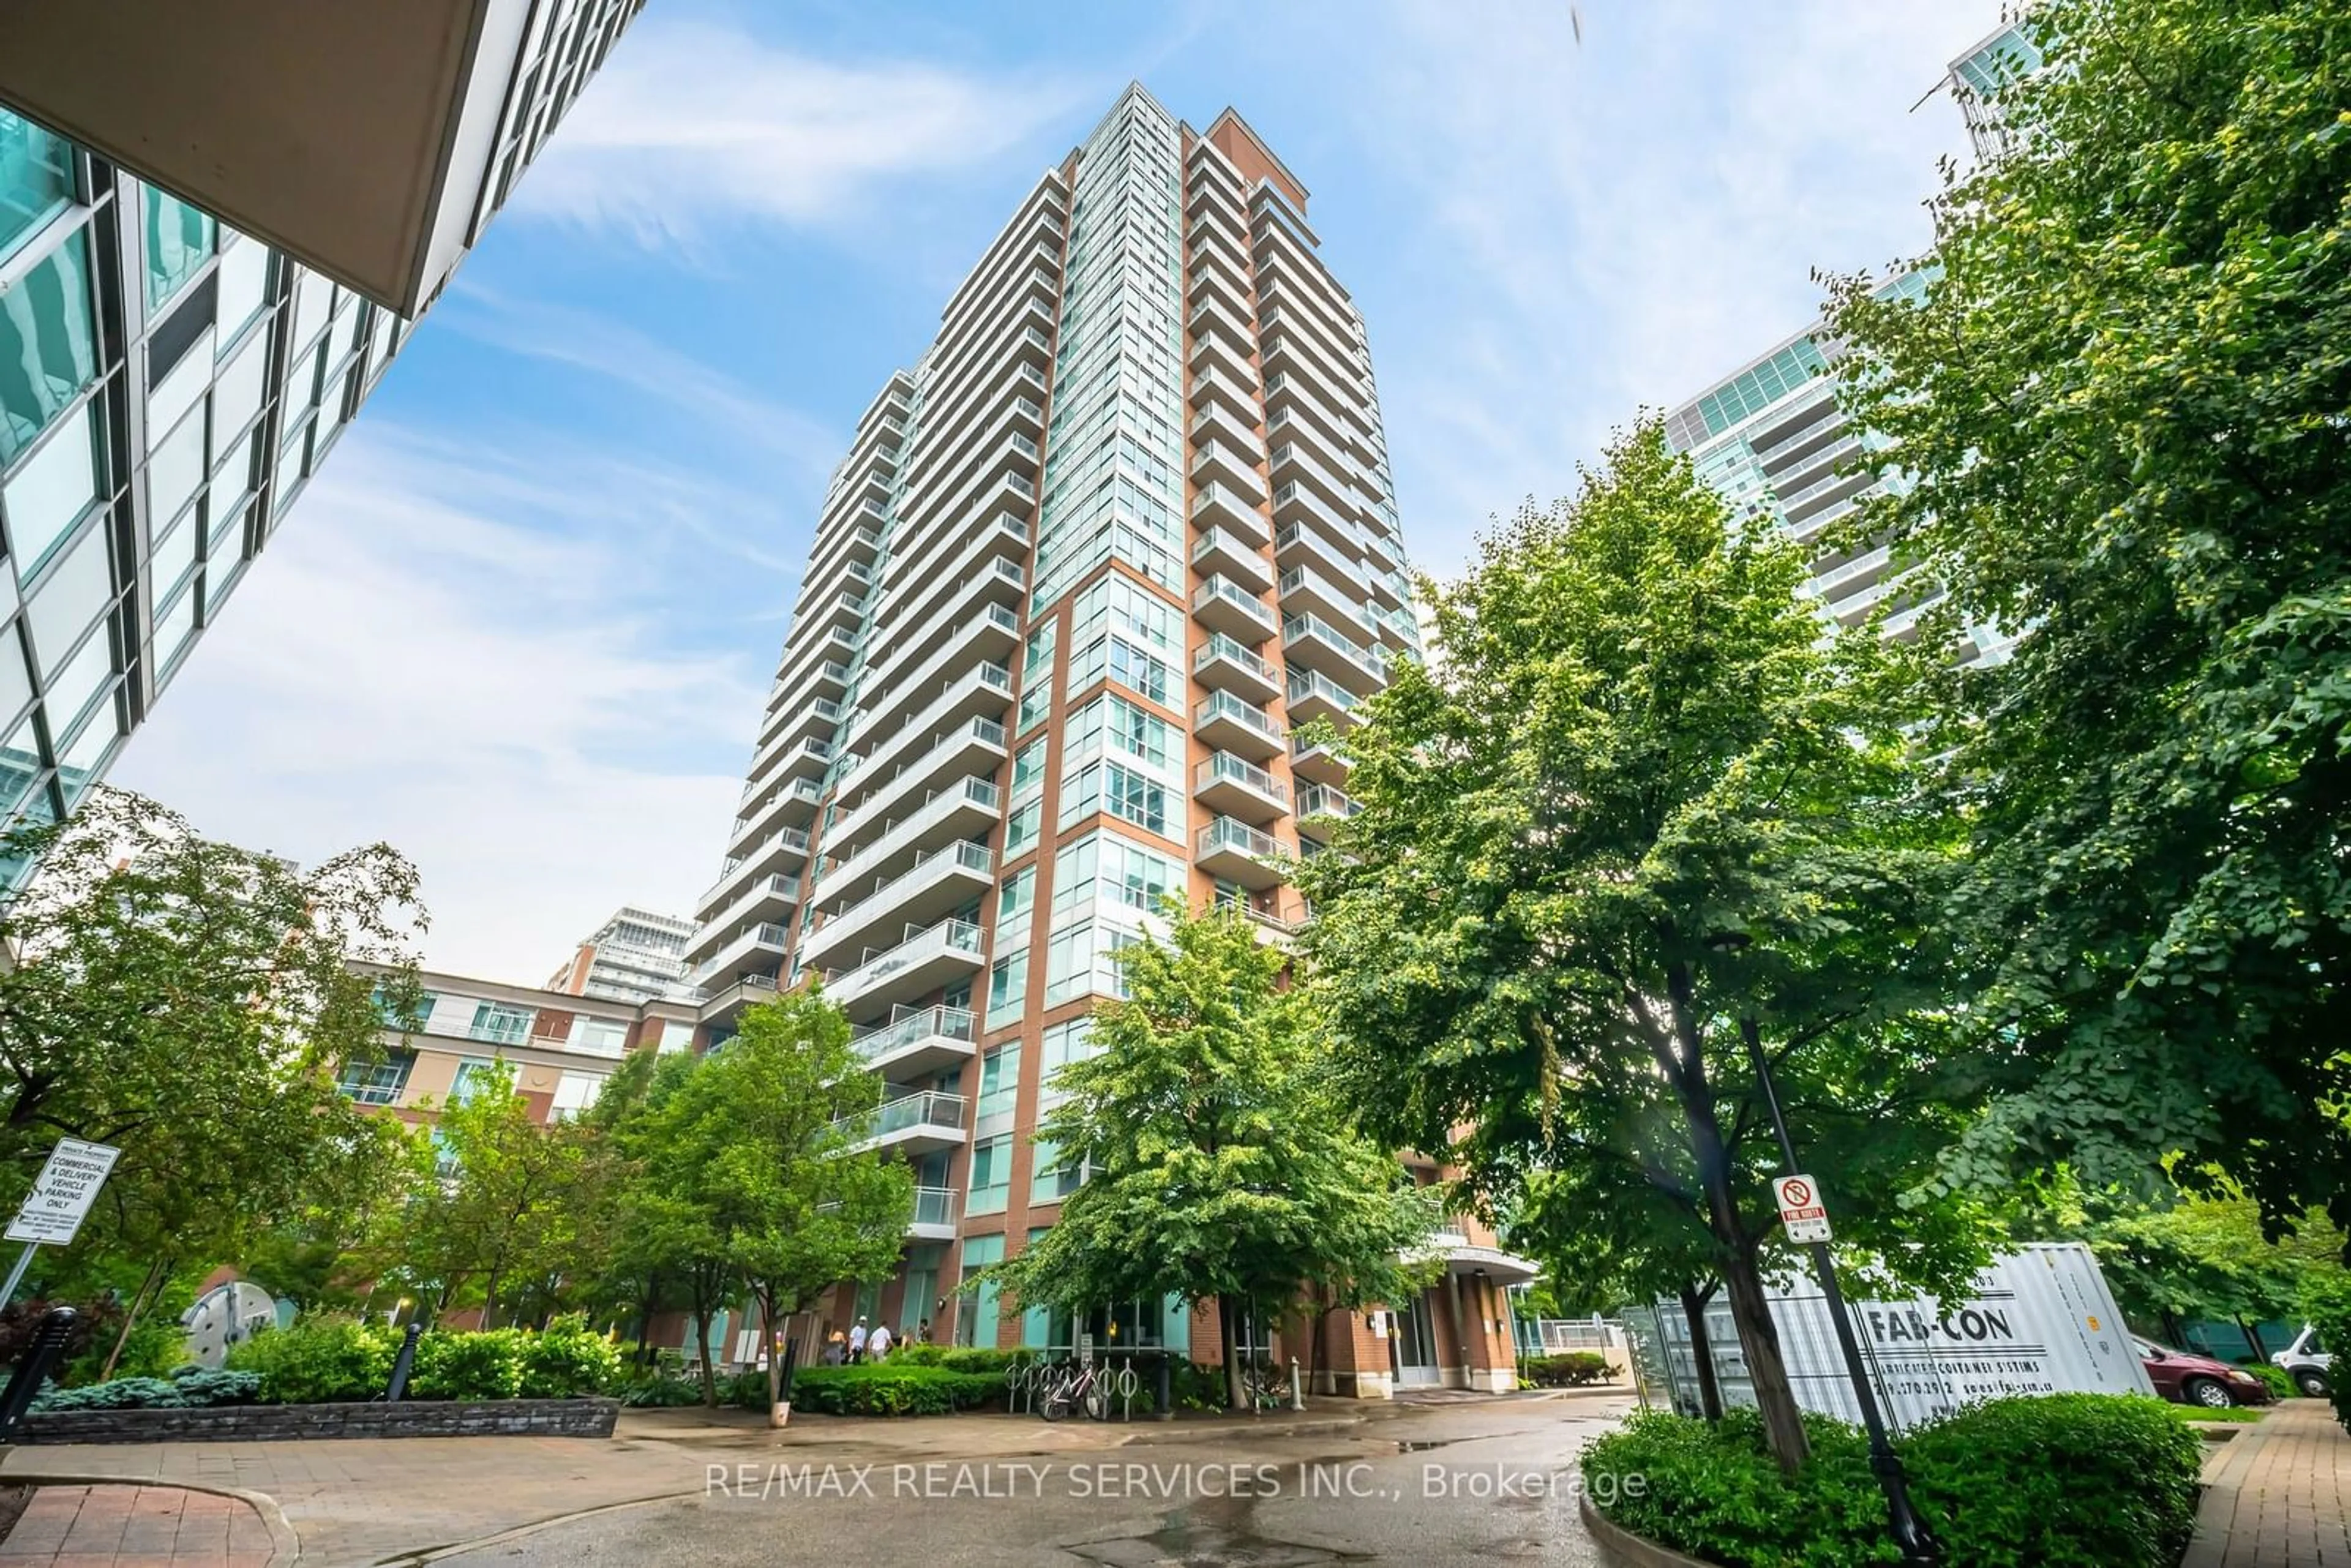 A pic from exterior of the house or condo for 50 Lynn Williams St #2108, Toronto Ontario M6K 3R9